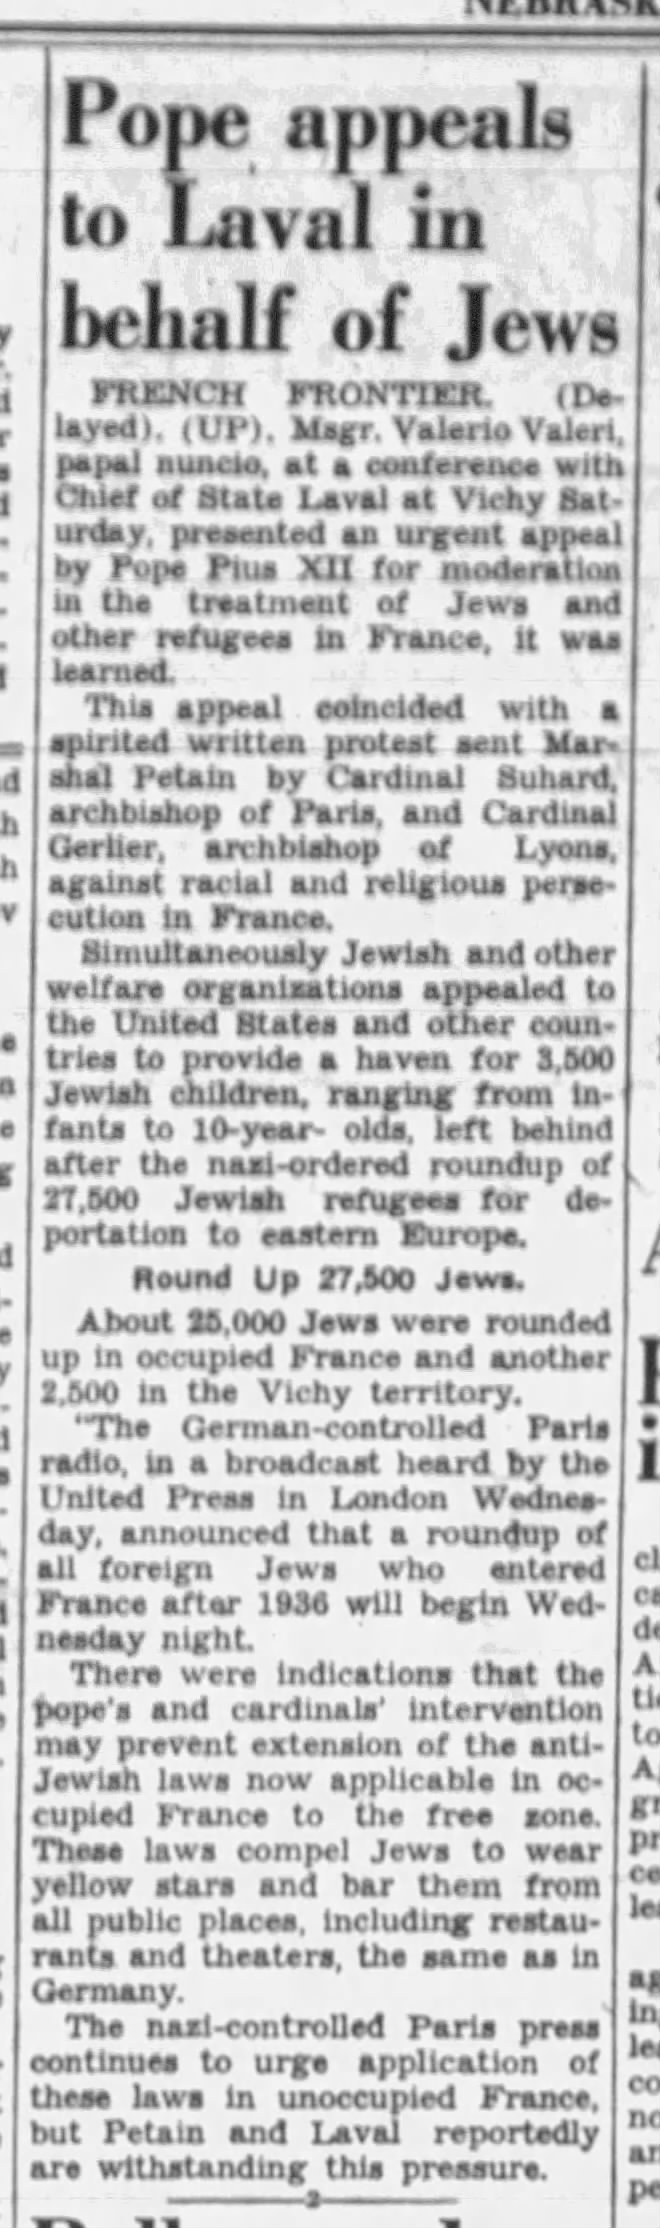 Pope appeals to Laval in behalf of Jews